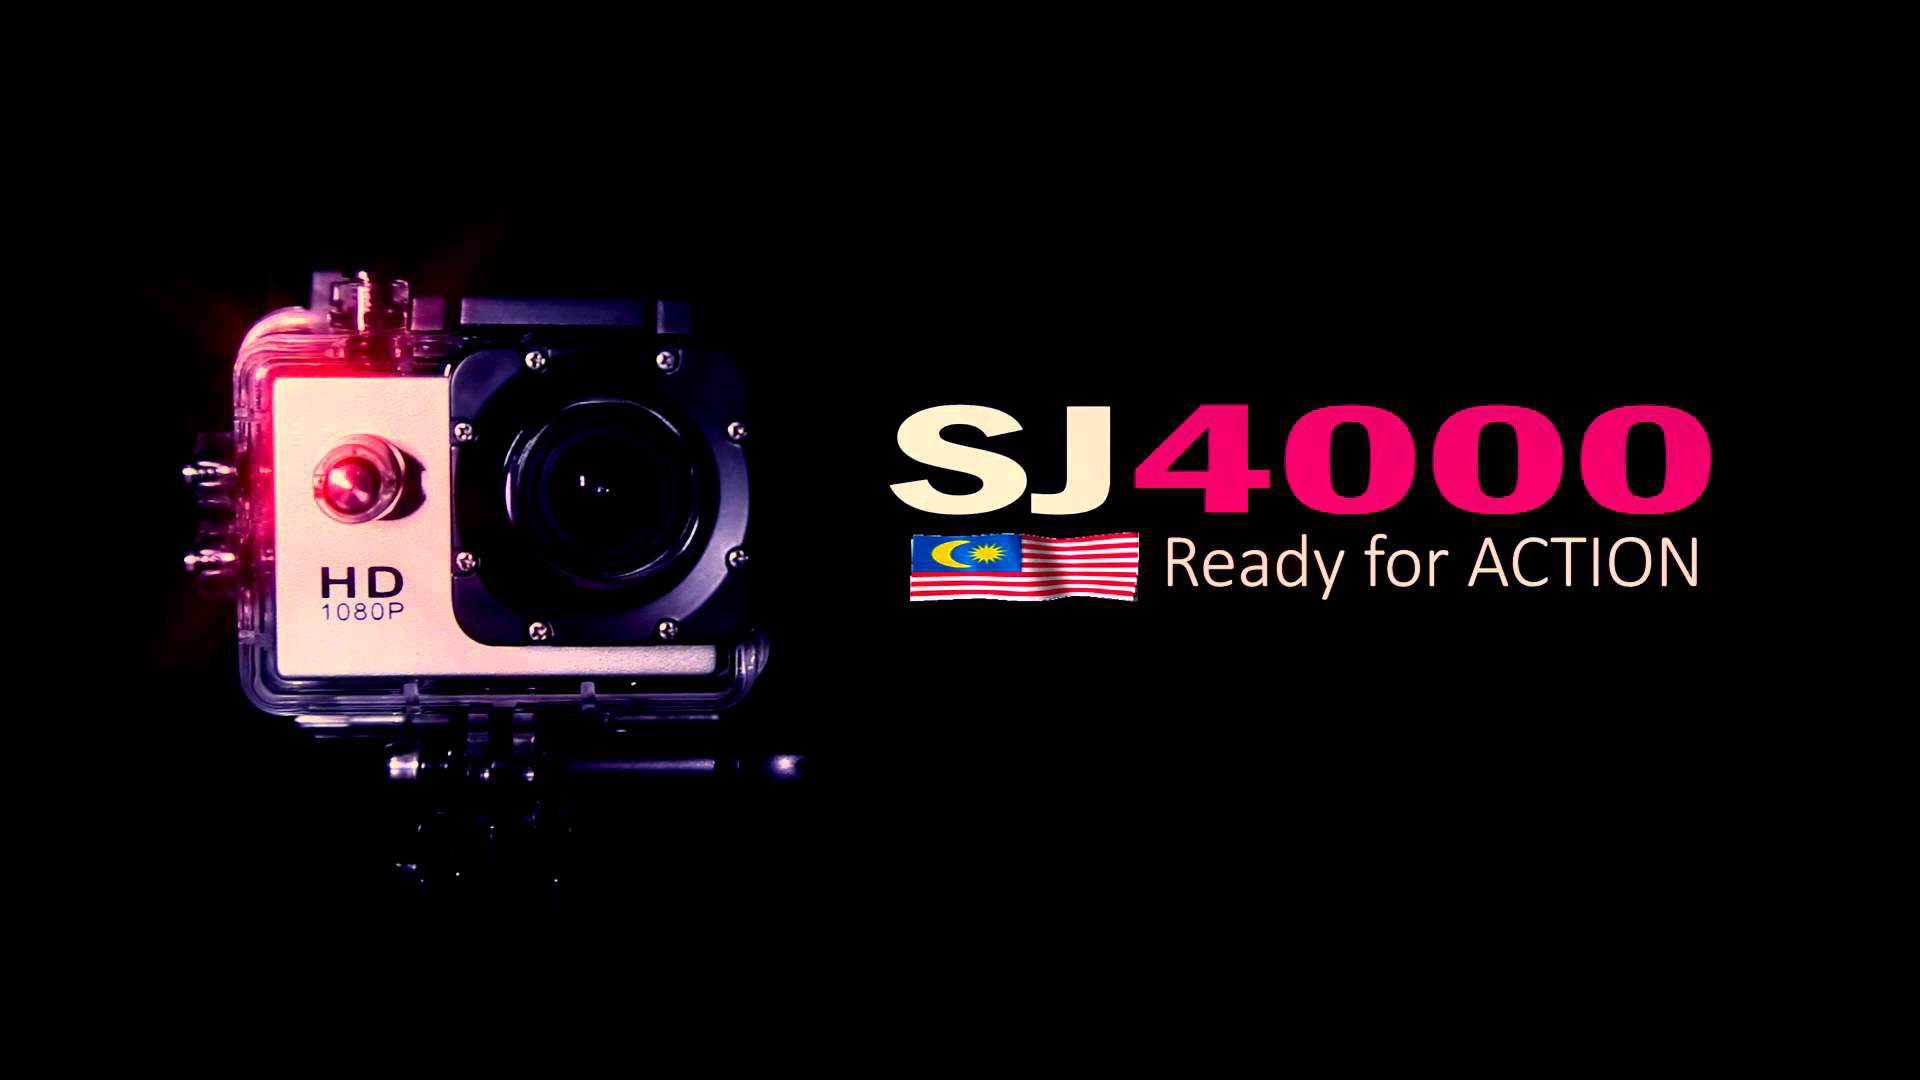 SJ4000 Ready for Action